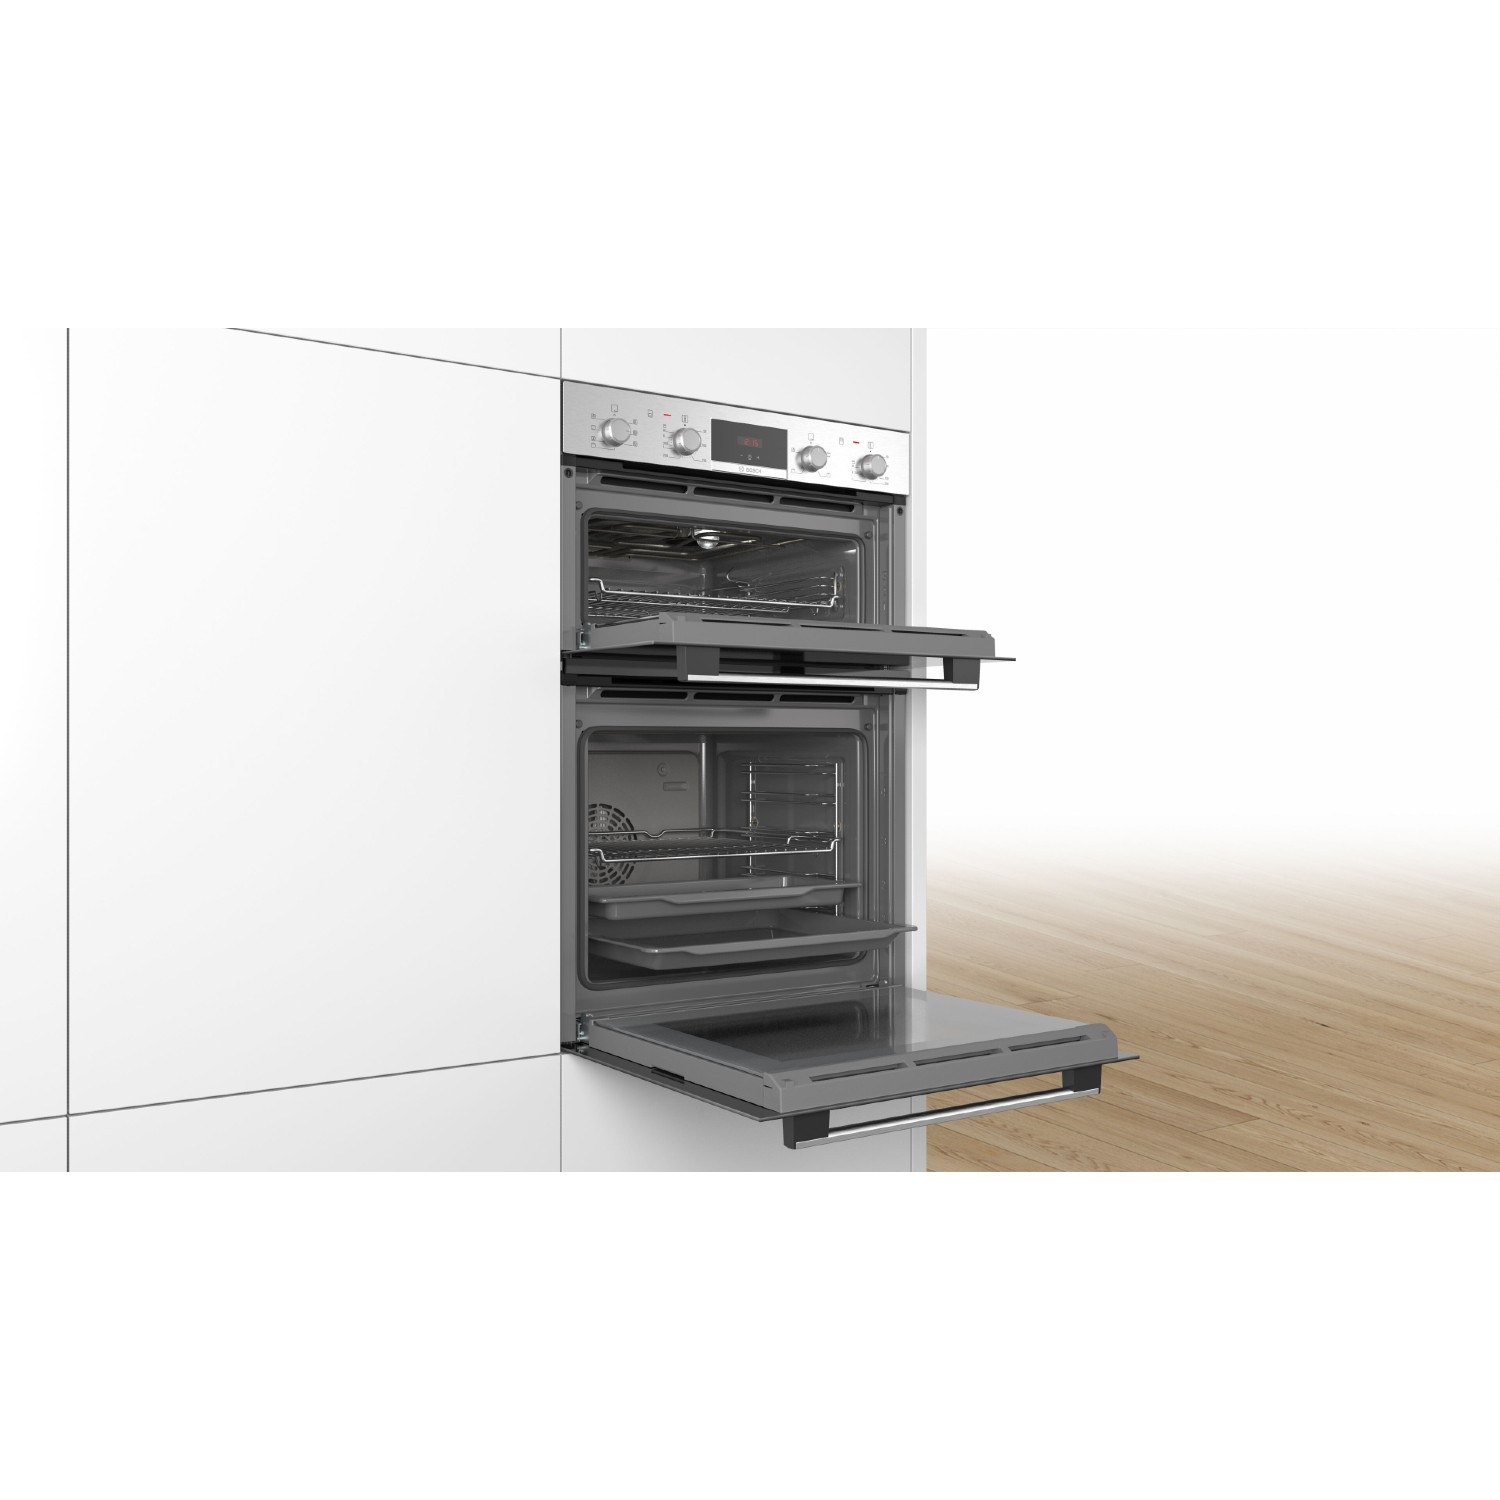 Bosch MBS533BS0B 59.4cm Built In Electric Double Oven with 3D Hot Air - Stainless Steel - 1